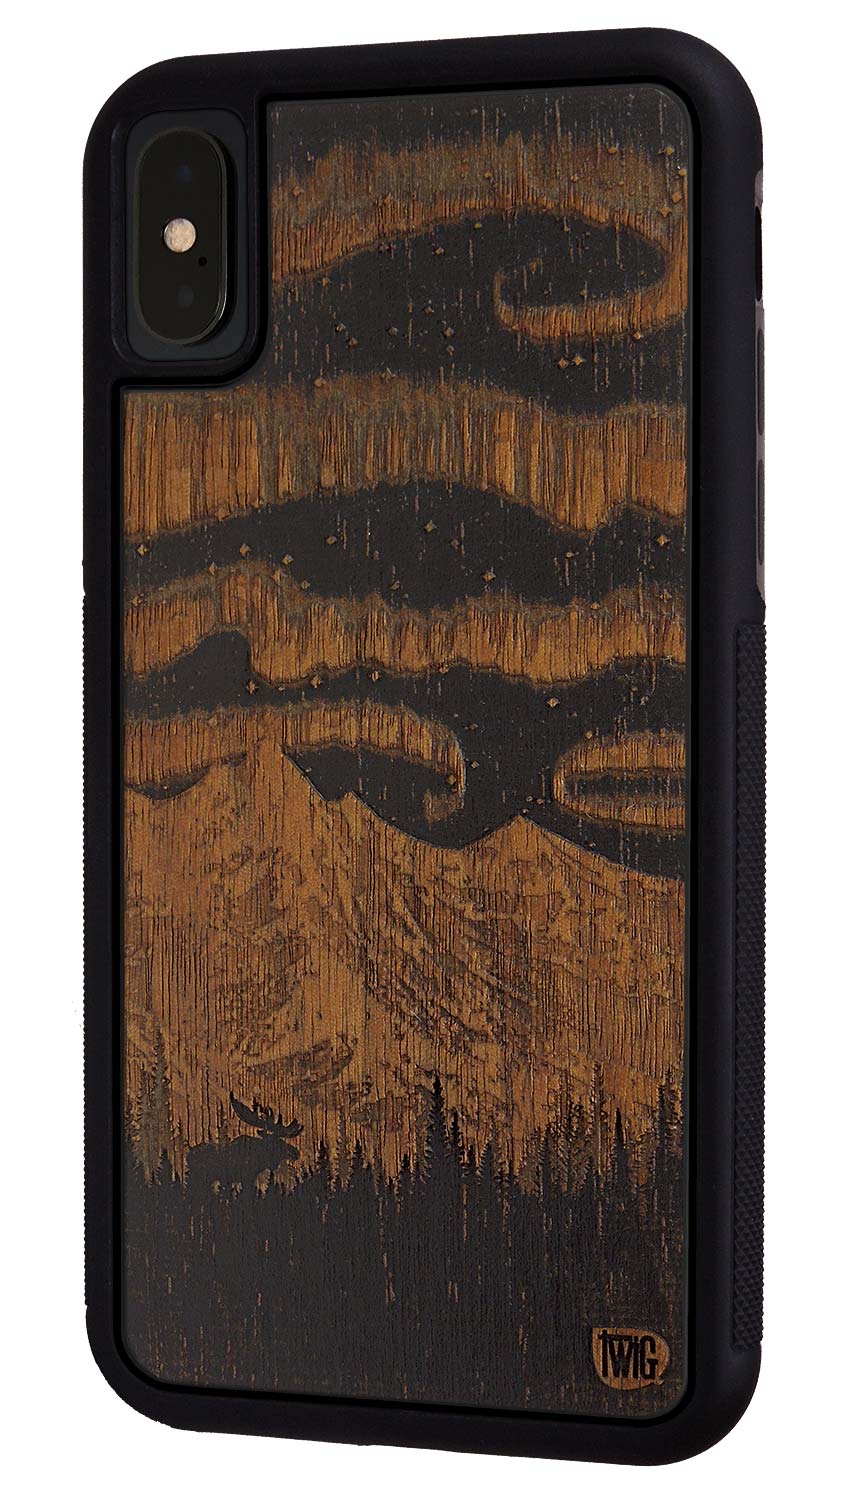 Northern Lights - Walnut iPhone Case, iPhone Case - Twig Case Co.